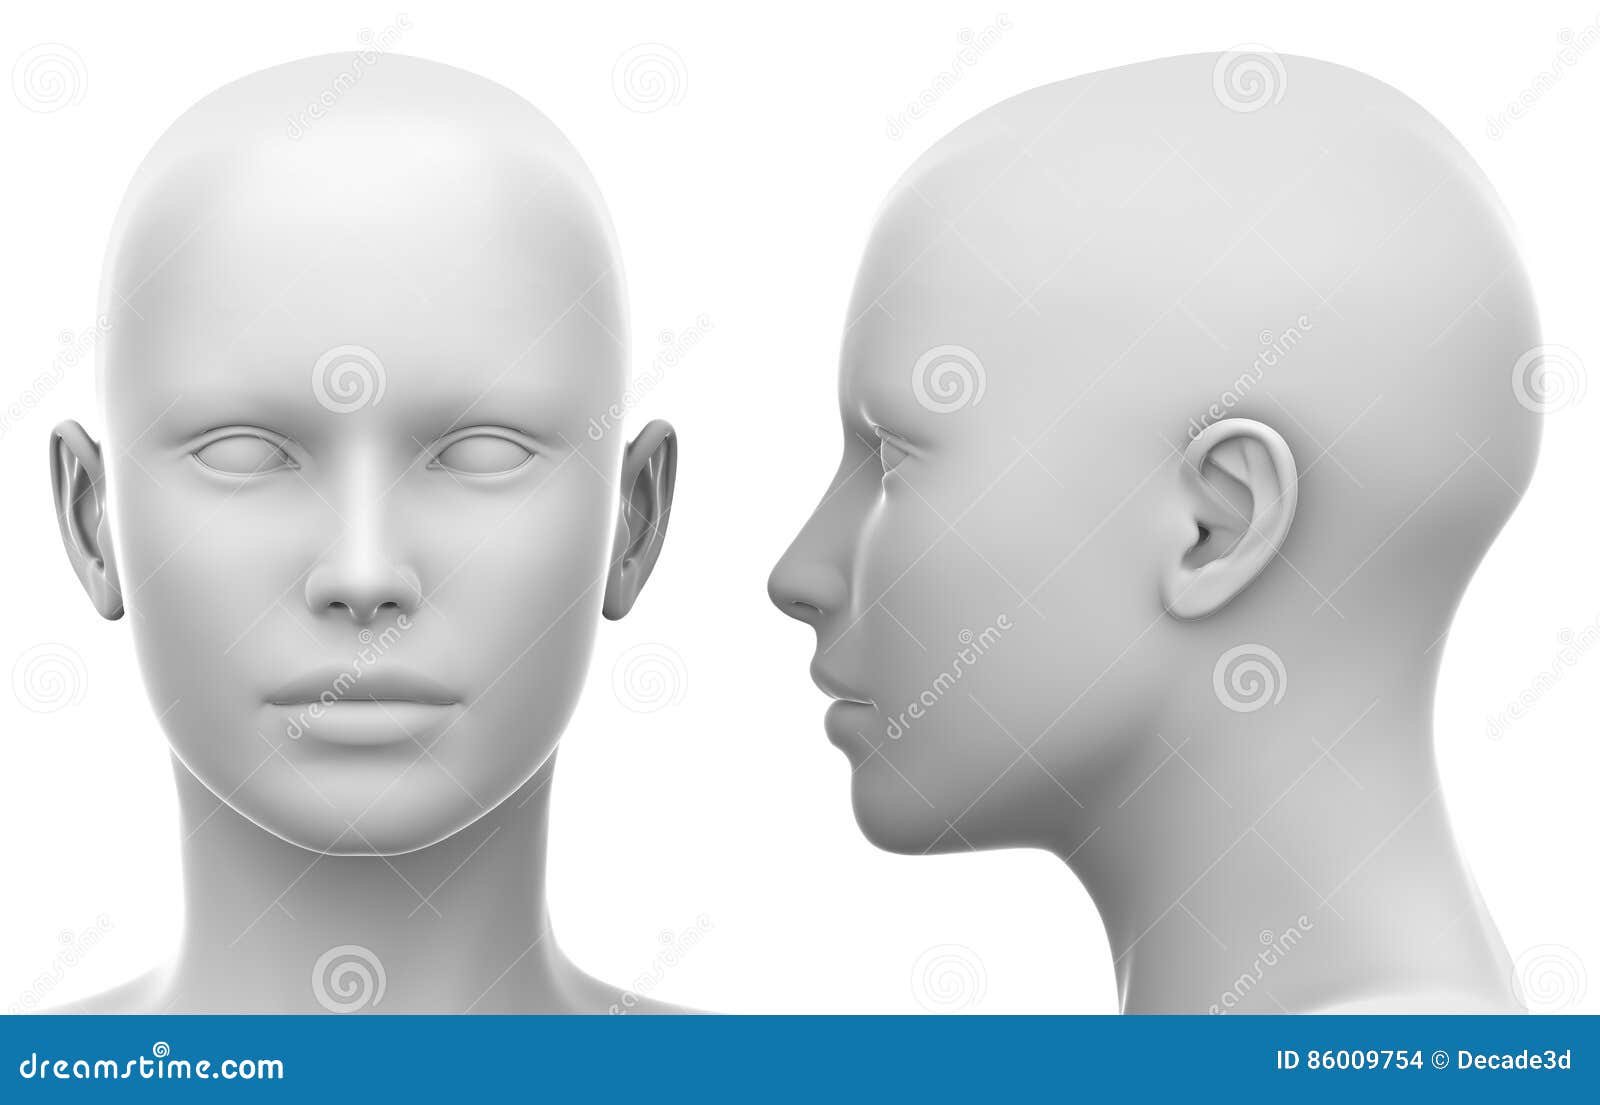 blank white female head - side and front view